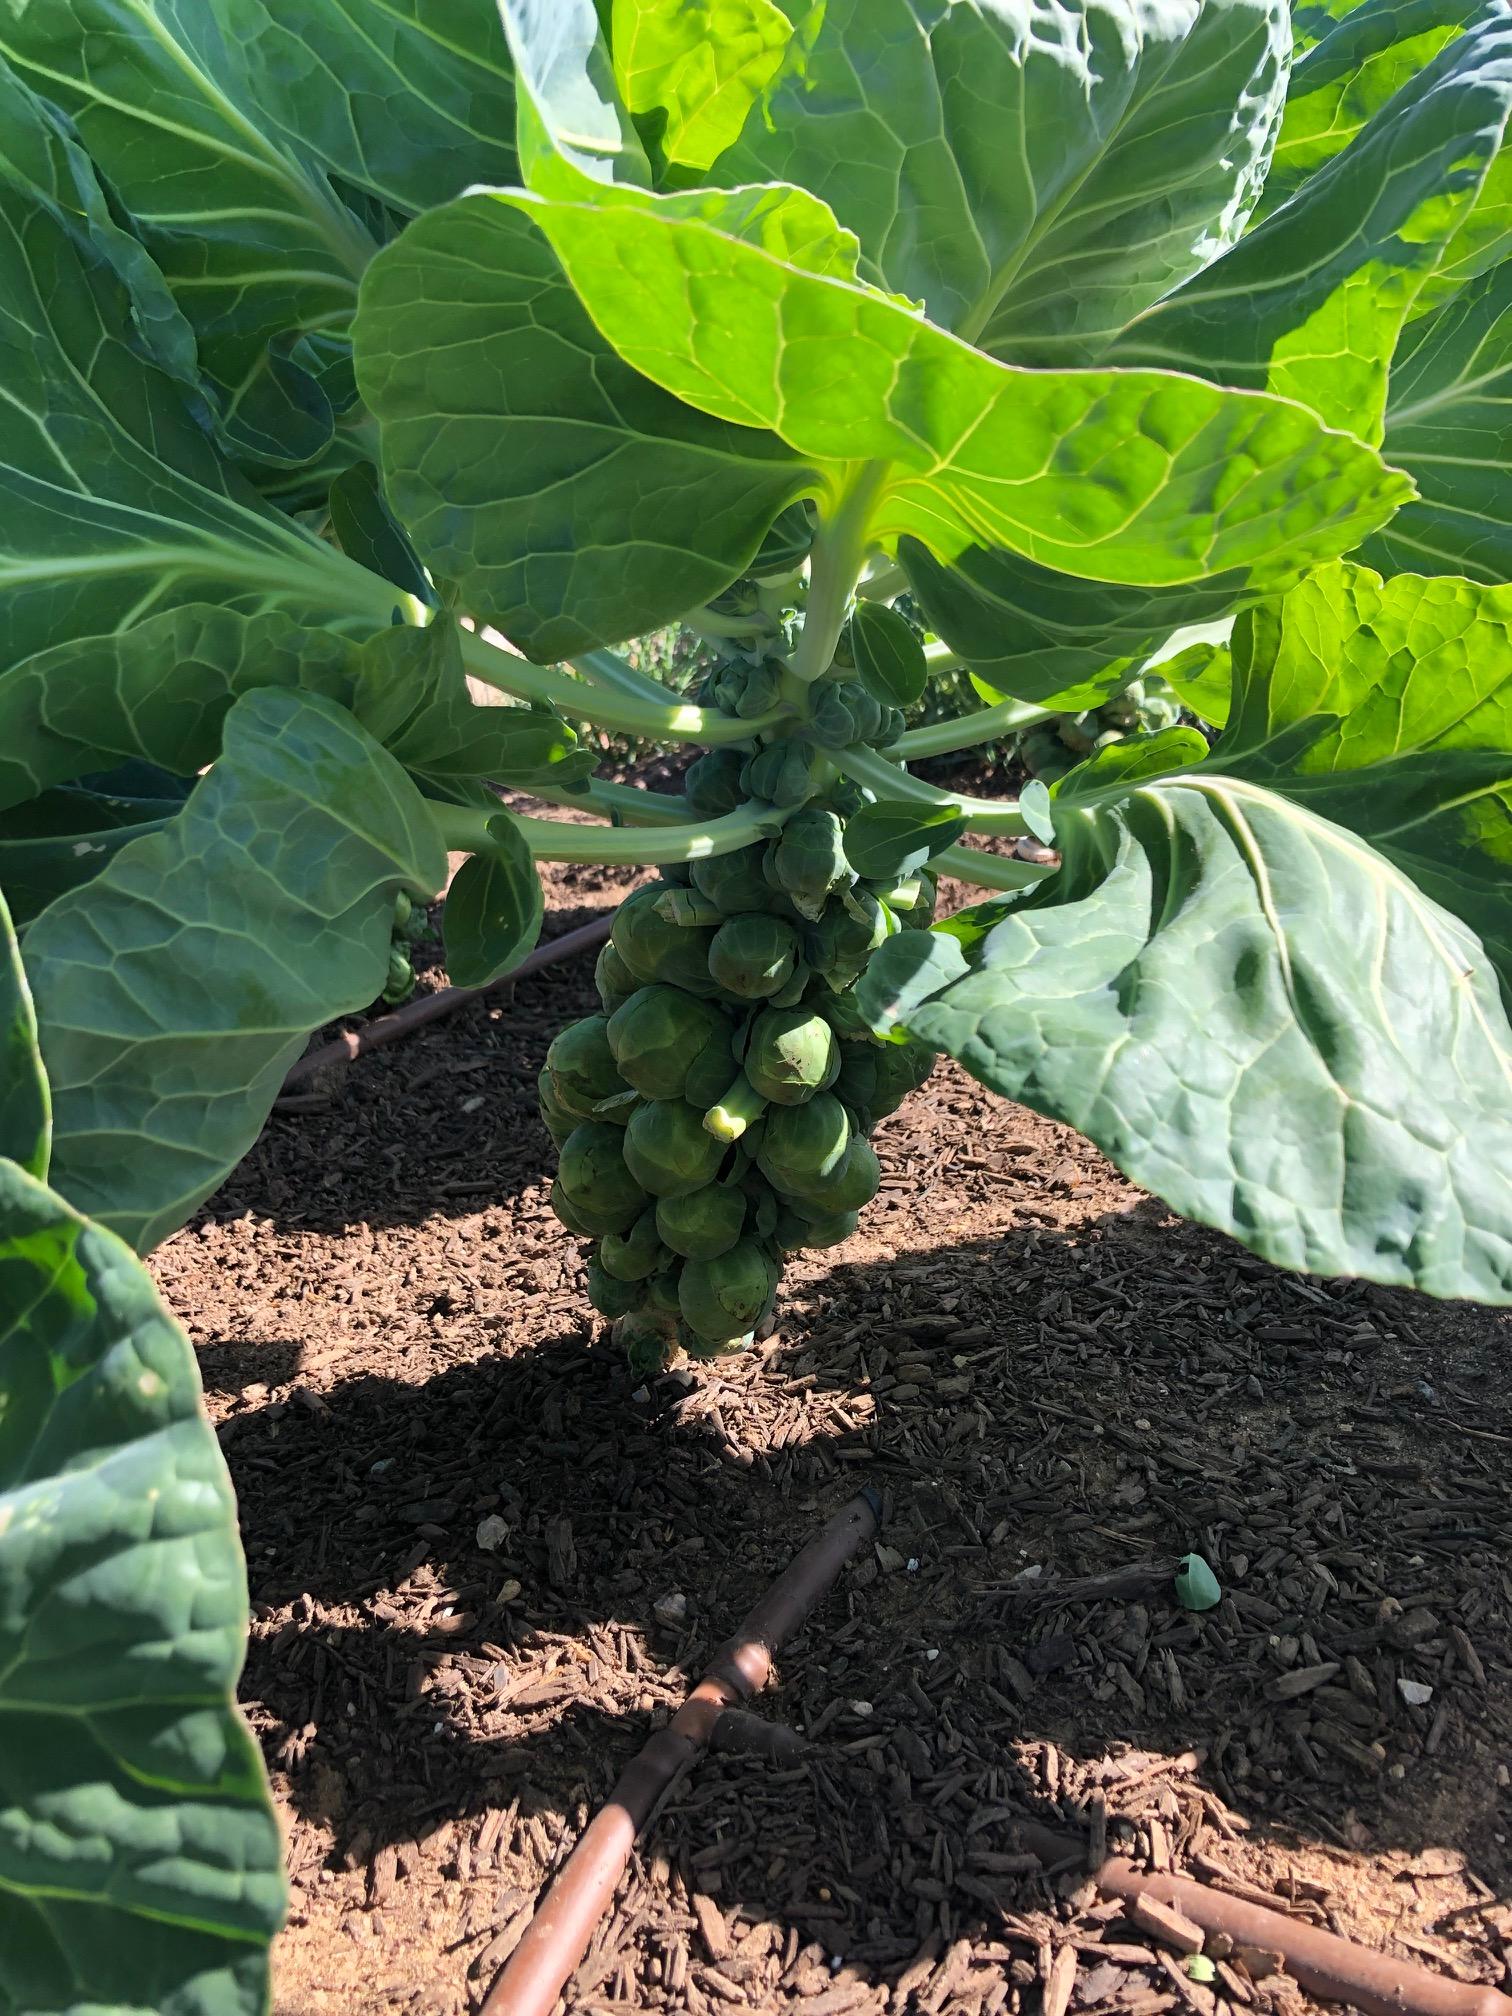 Brussels sprouts grow in the axils of the leaves. The bottom leaves in this photo were removed to make harvesting easier. (NDSU photo)